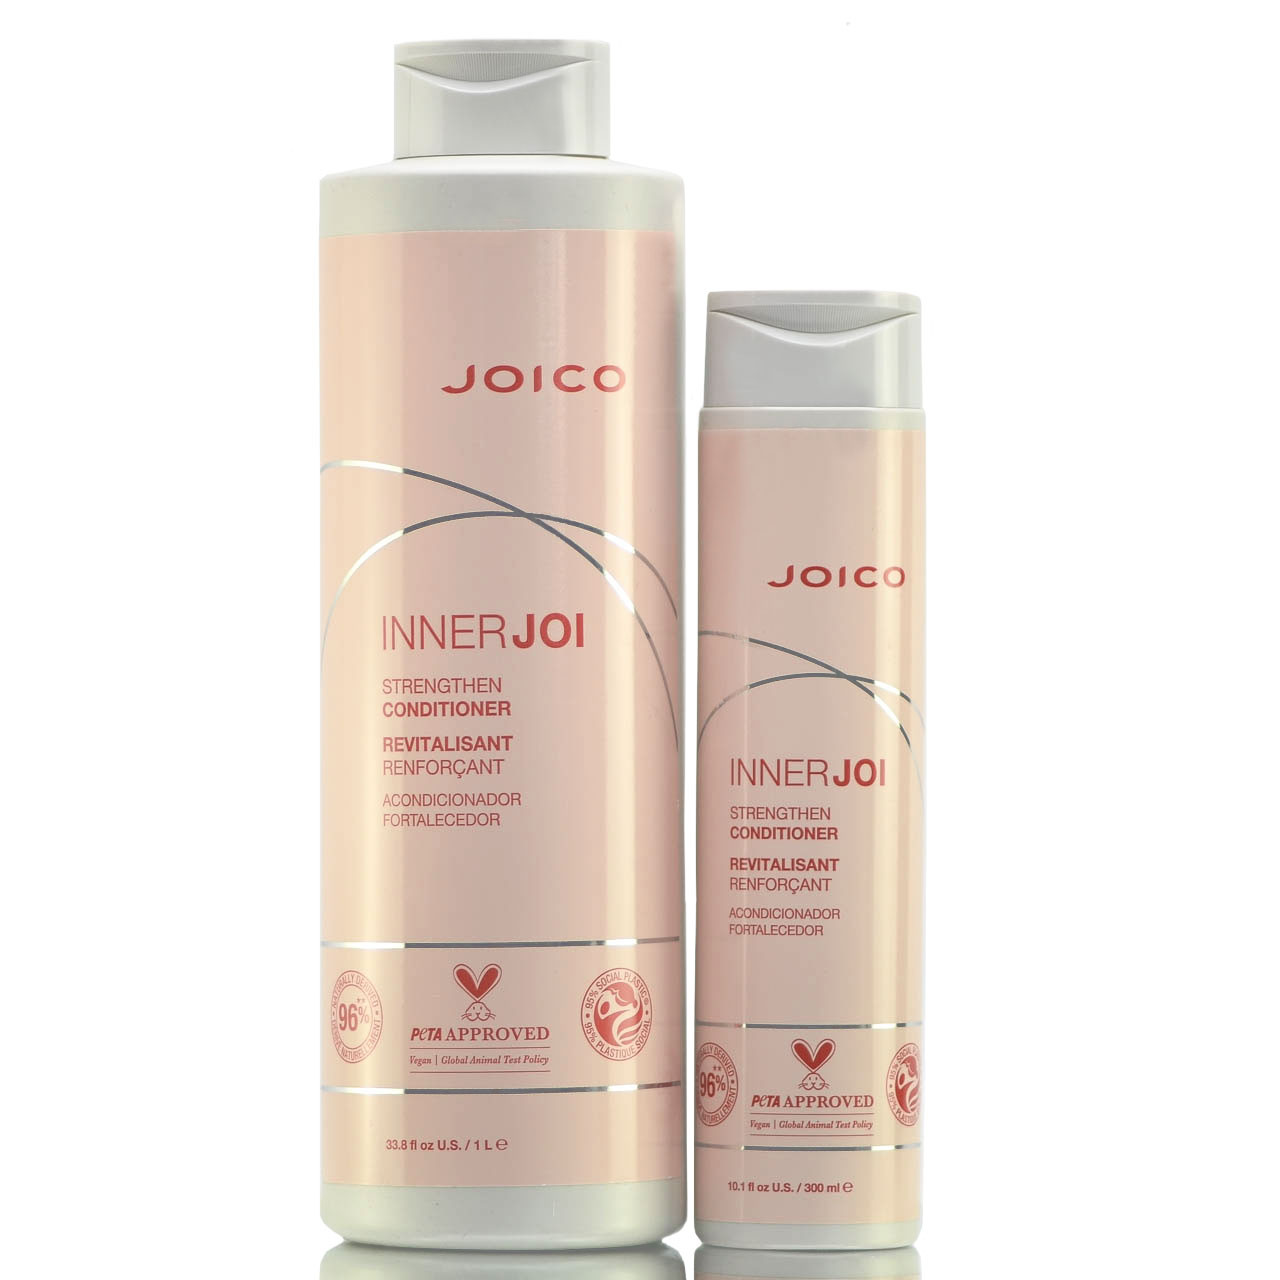 Joico Moisture Recovery Shampoo And Conditioner Liter Duo Set (33.8Oz) New  Look